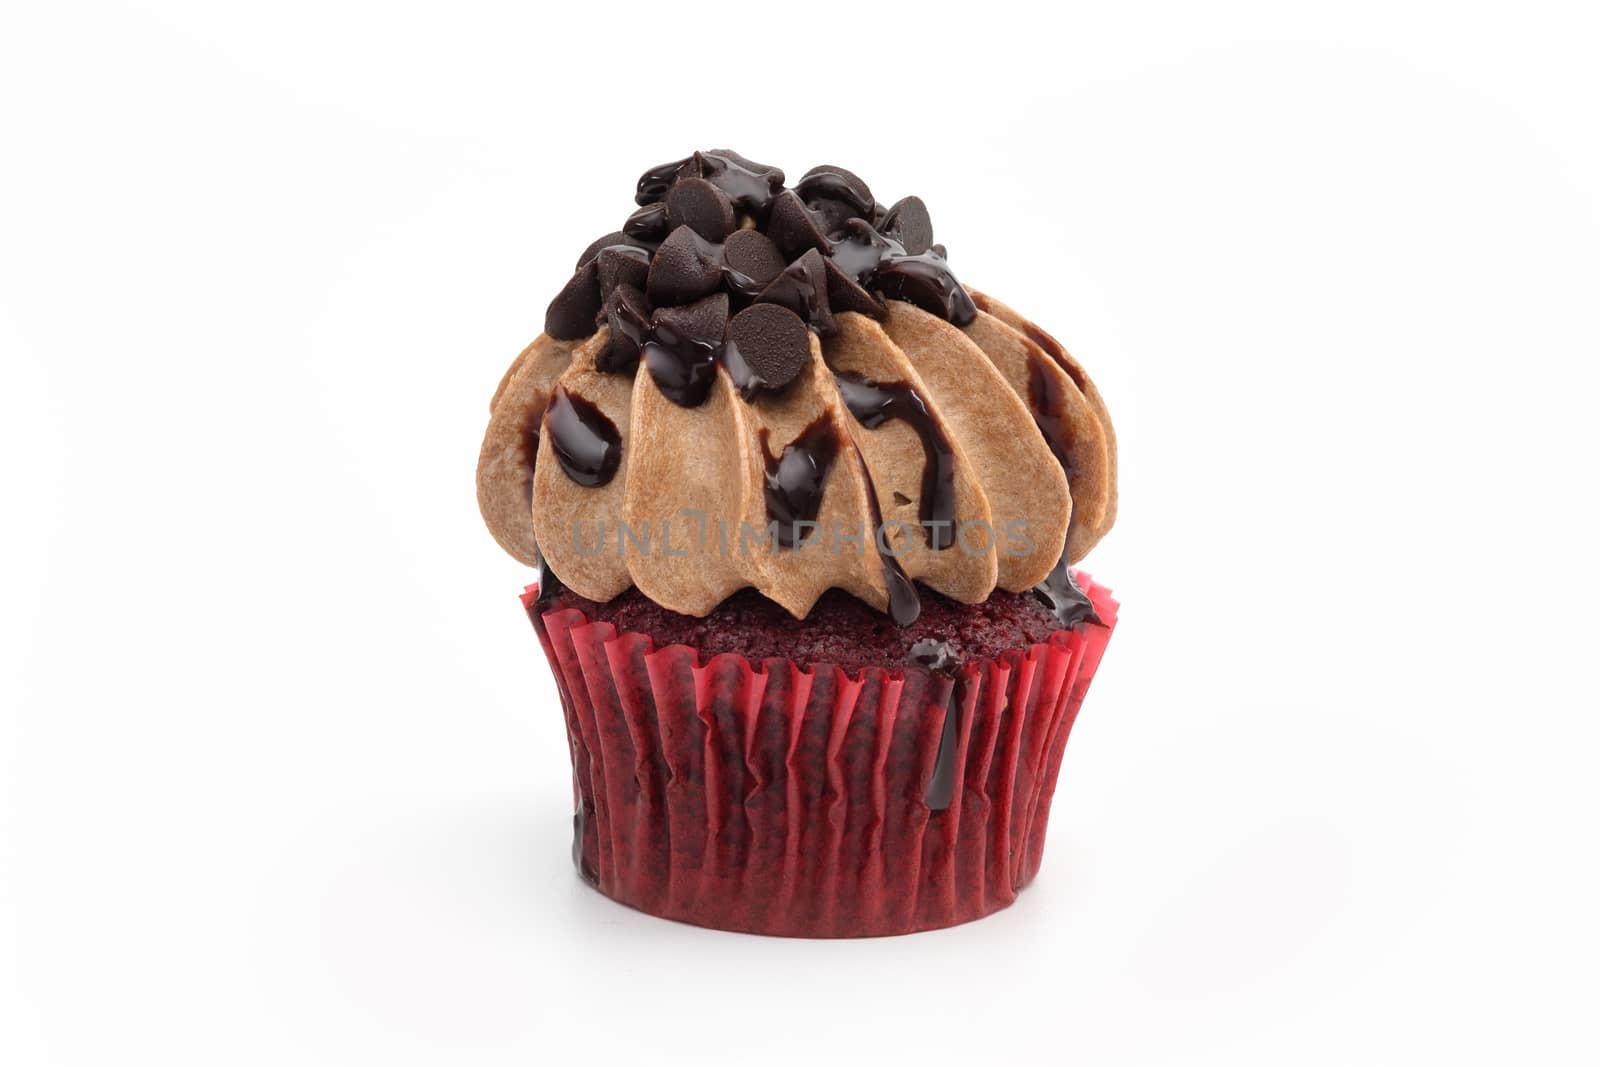 Chocolate cupcake with sprinkles isolated on white background.